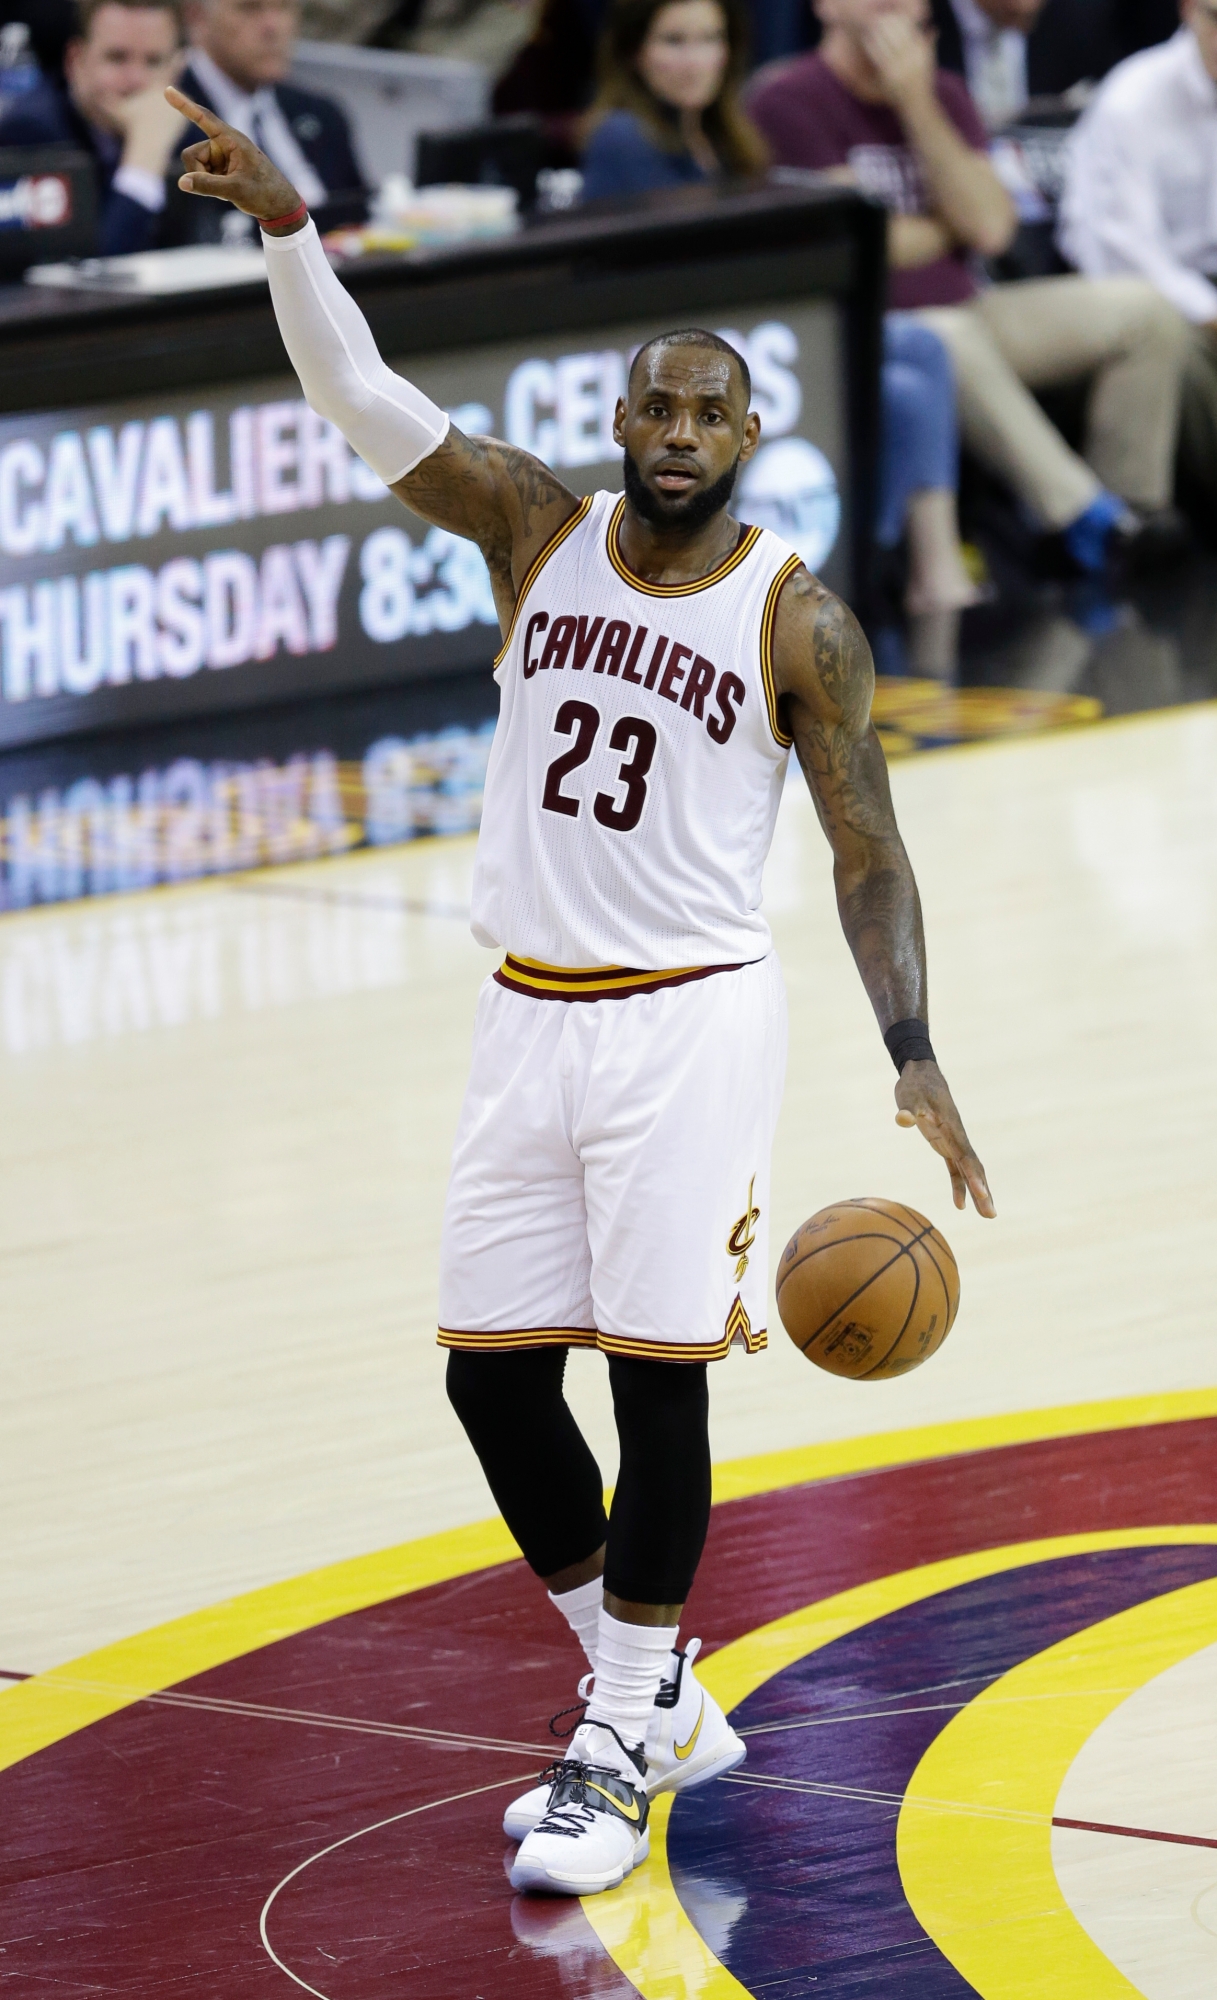 Cleveland Cavaliers' LeBron James (23) brings the ball up the floor against the Boston Celtics during the second half of Game 4 of the NBA basketball Eastern Conference finals, Tuesday, May 23, 2017, in Cleveland. The Cavaliers won 112-99. (AP Photo/Tony Dejak)Lebron James CELTICS CAVALIERS BASKETBALL